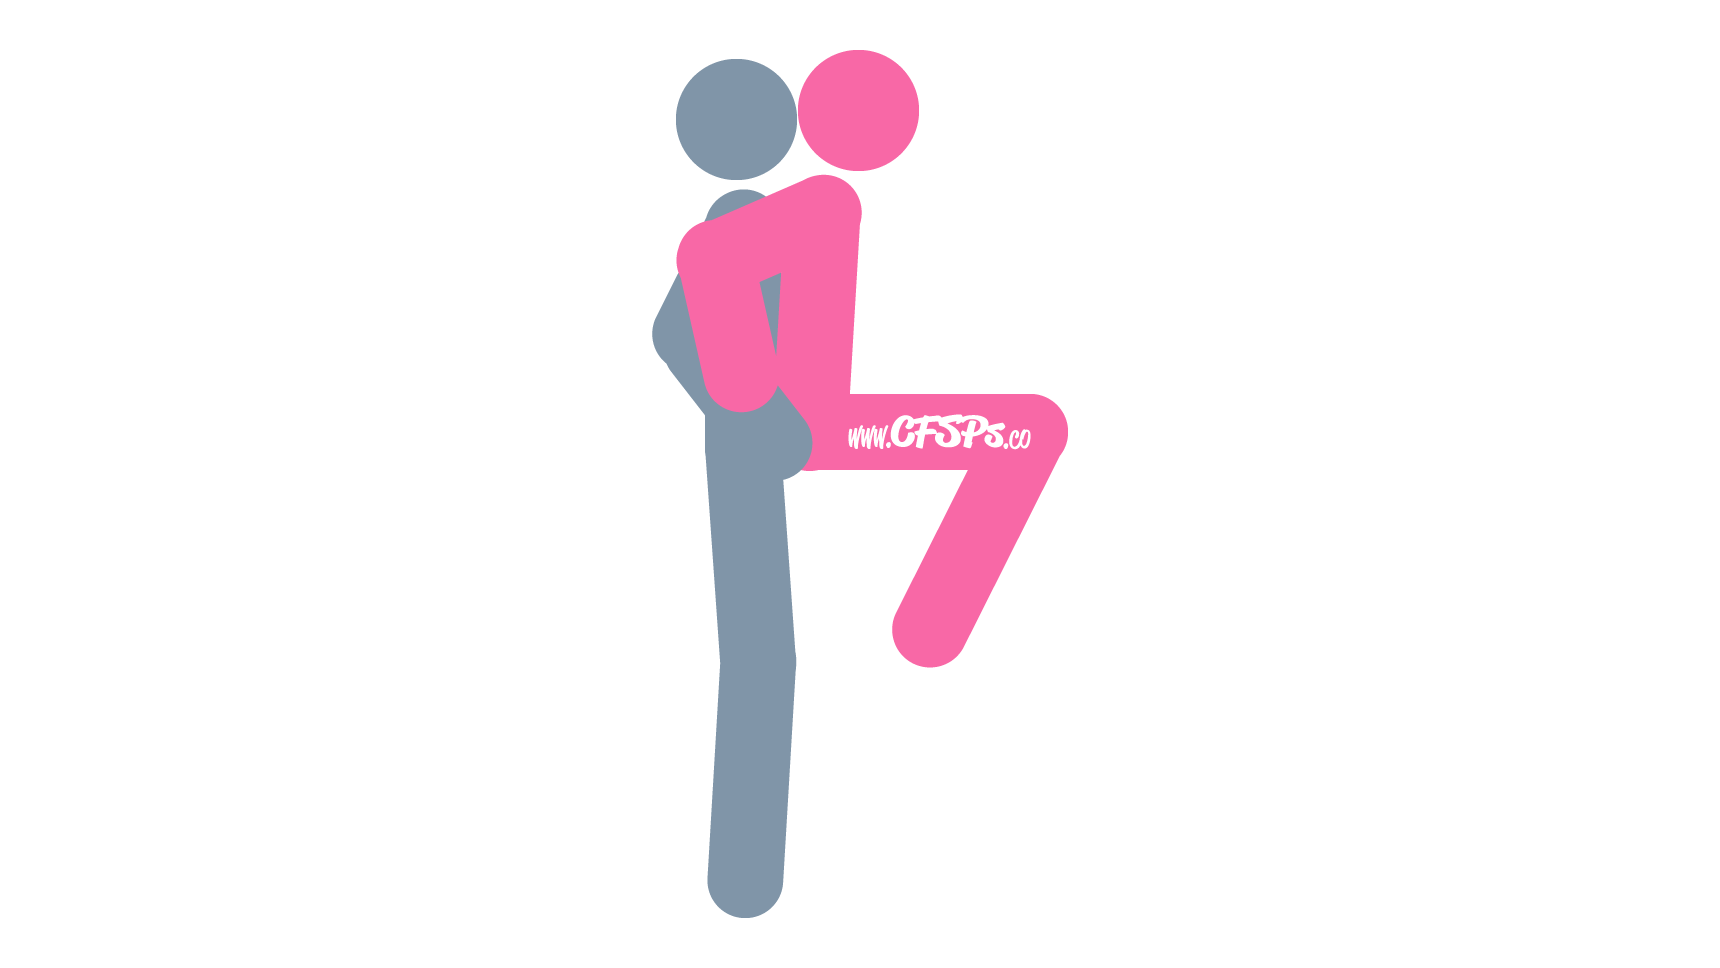 This stick figure image depicts a man and woman having sex in the Squat Balance sex position. The woman is standing on a low chair or table, squatting back, and the man is standing behind her holding her butt for support.